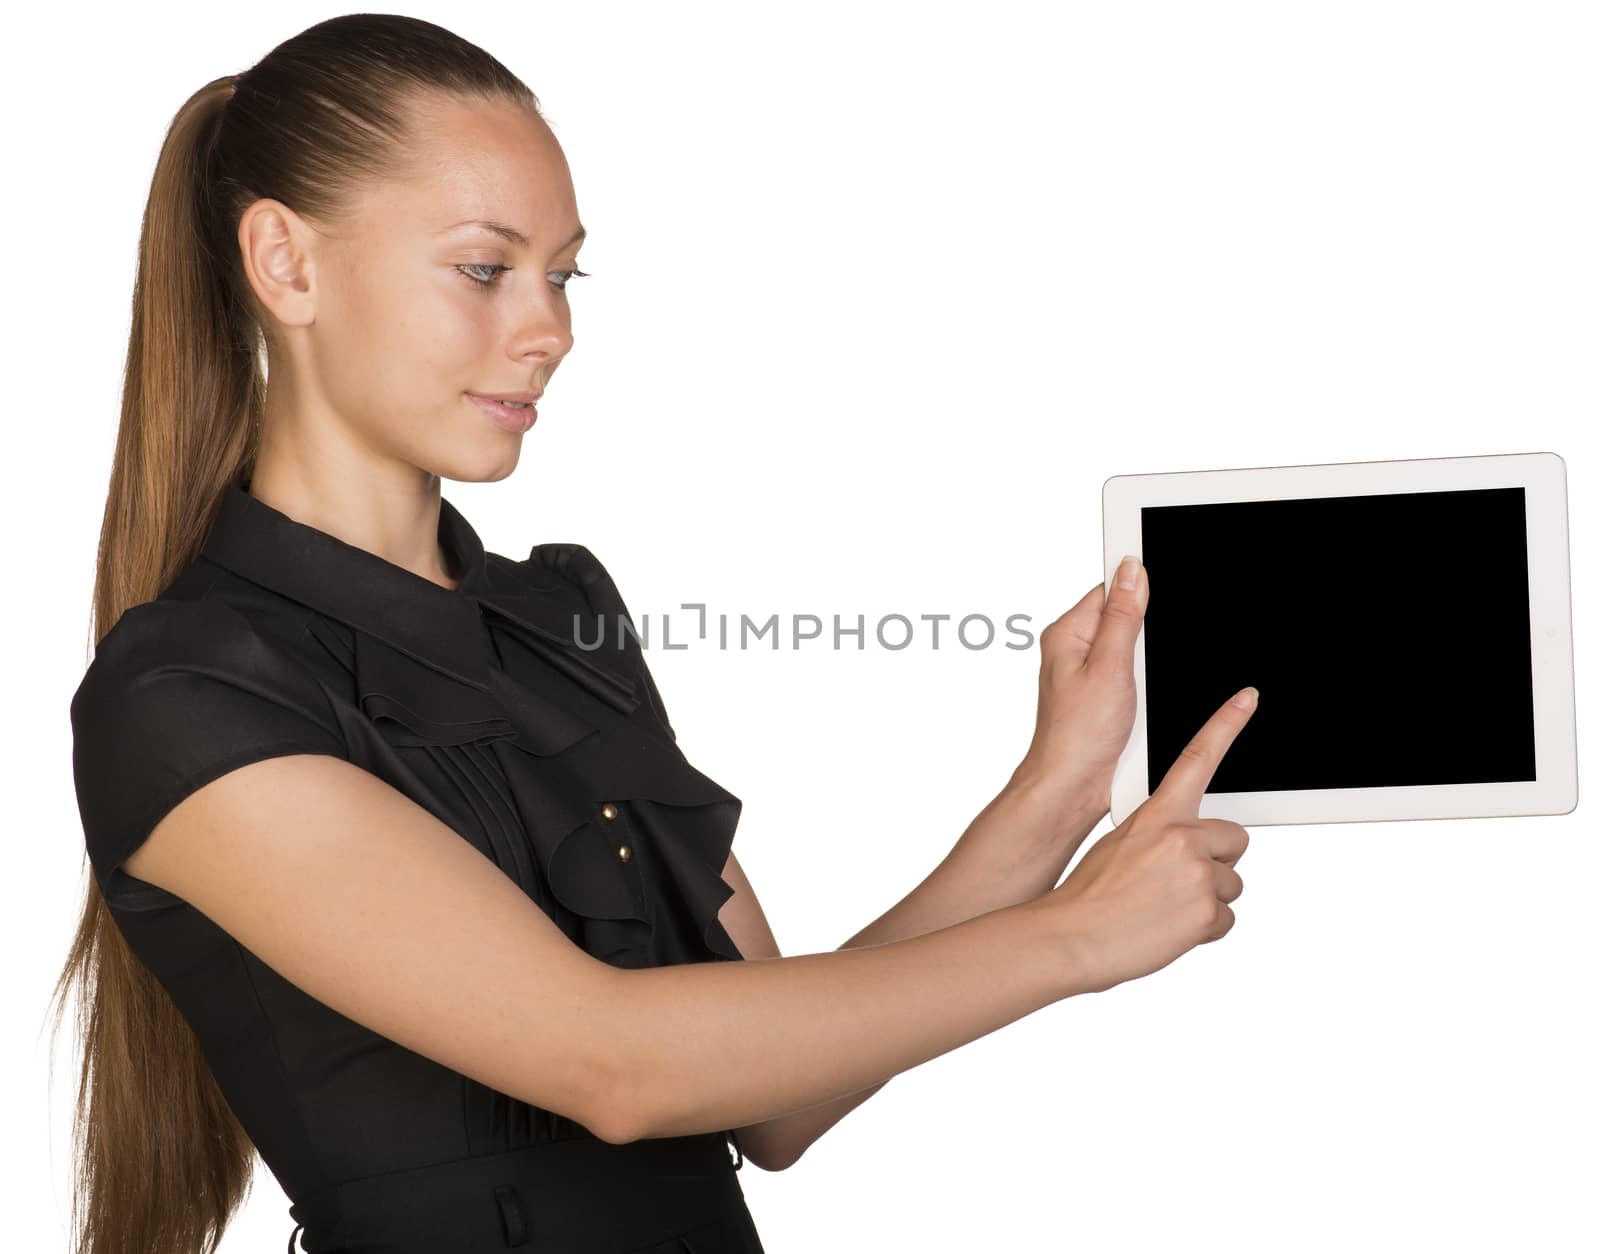 Beautiful girl in dress holding tablet and pointing at screen. Isolated on white background